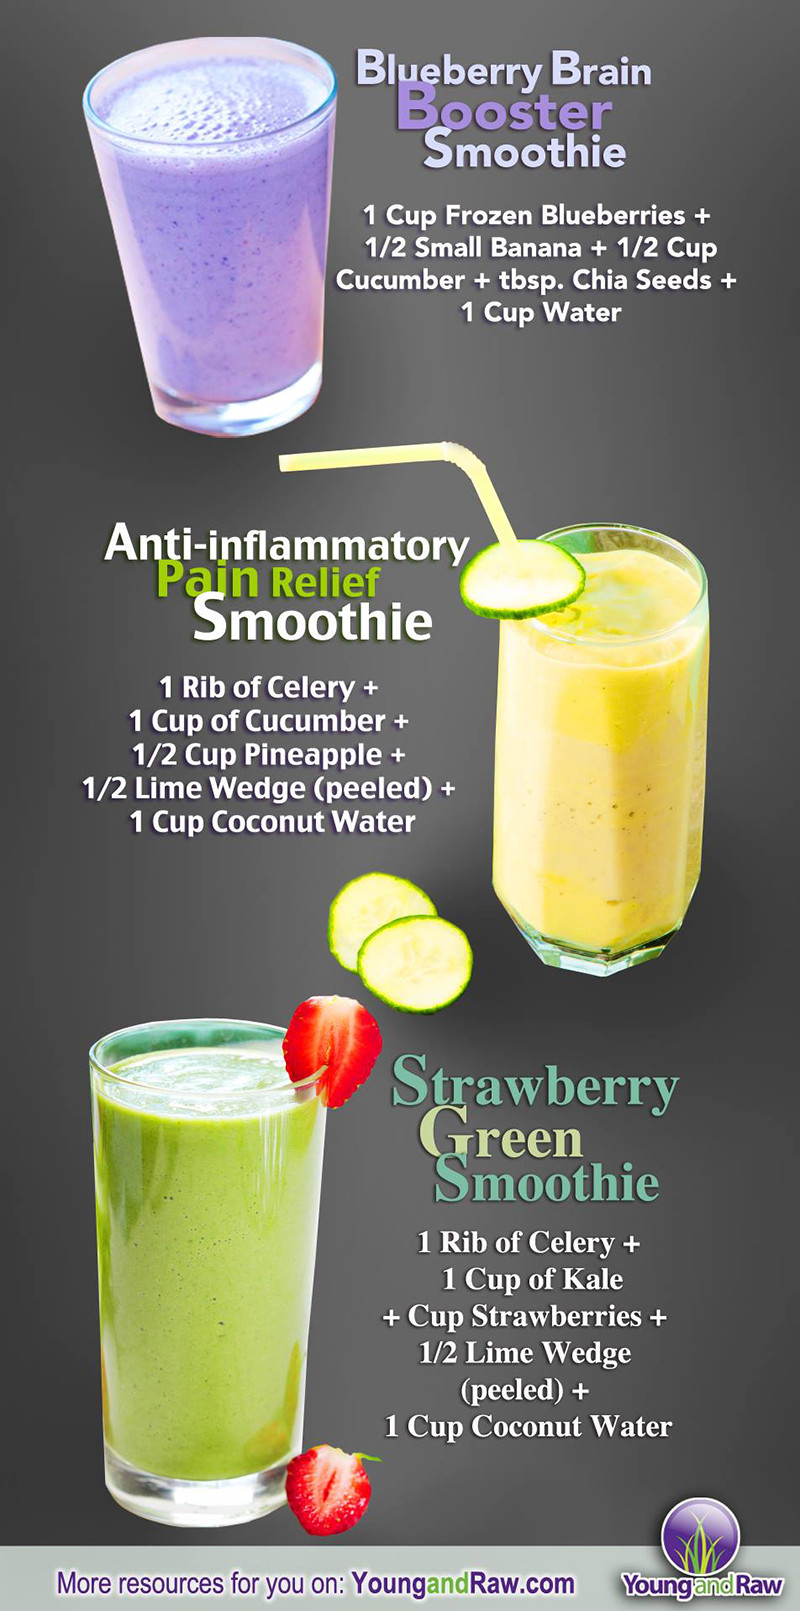 Are Smoothies Healthy
 3 Smoothies for Inflammation and Pain Relief image